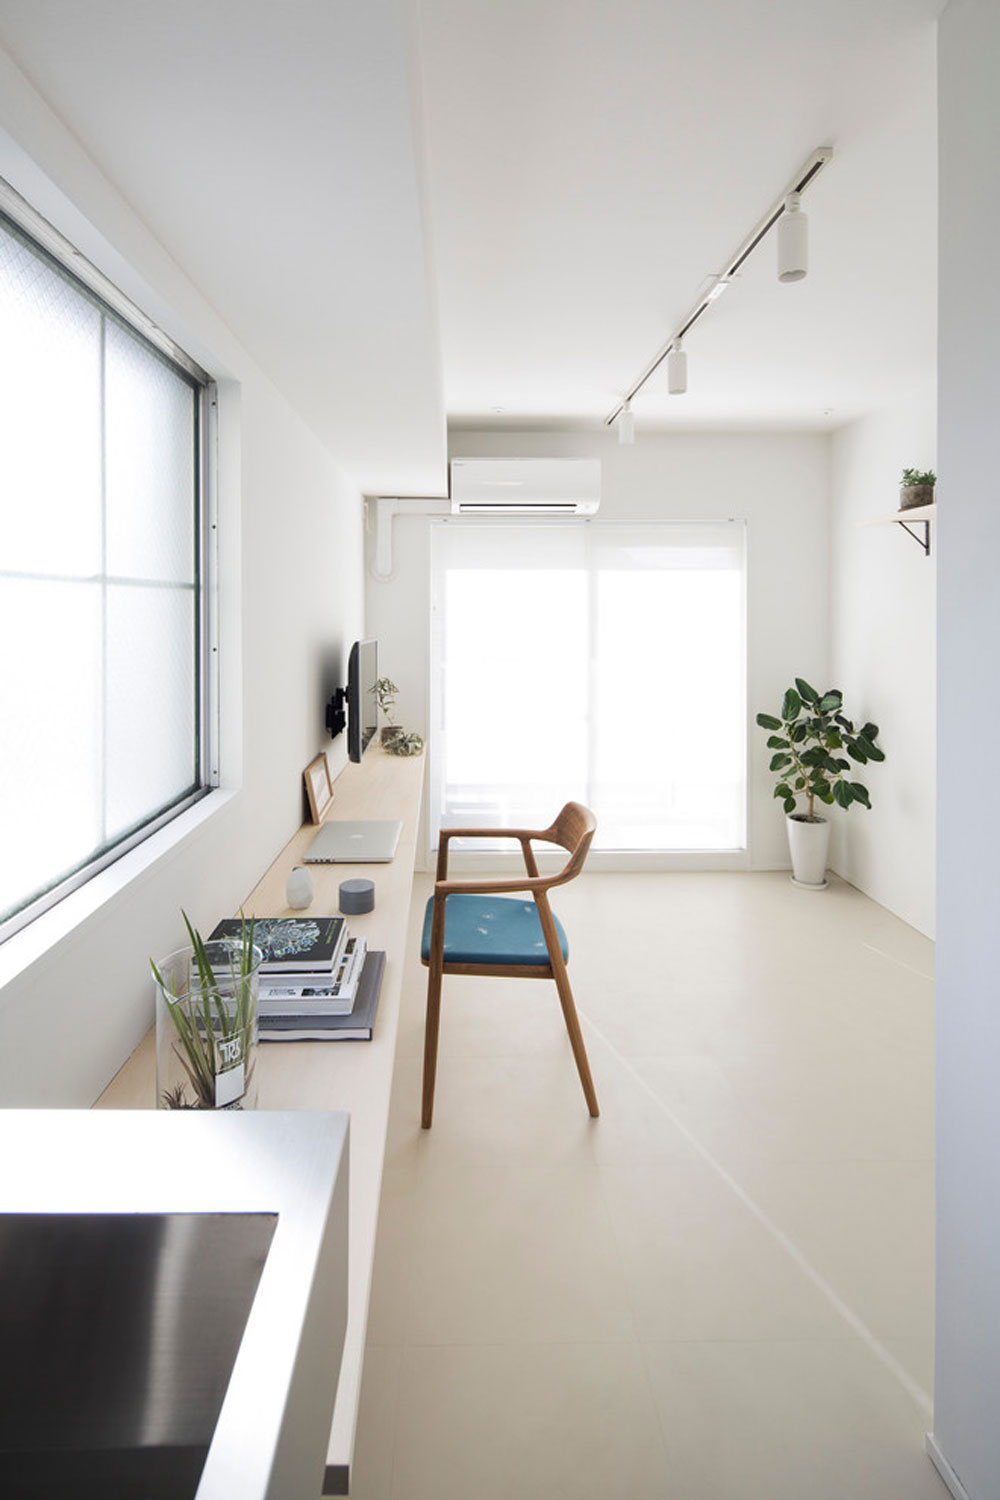 G-APARTMENT-by-OSKAPARTNERS-INC. Minimalist apartment ideas for a simple living and lovely home decor